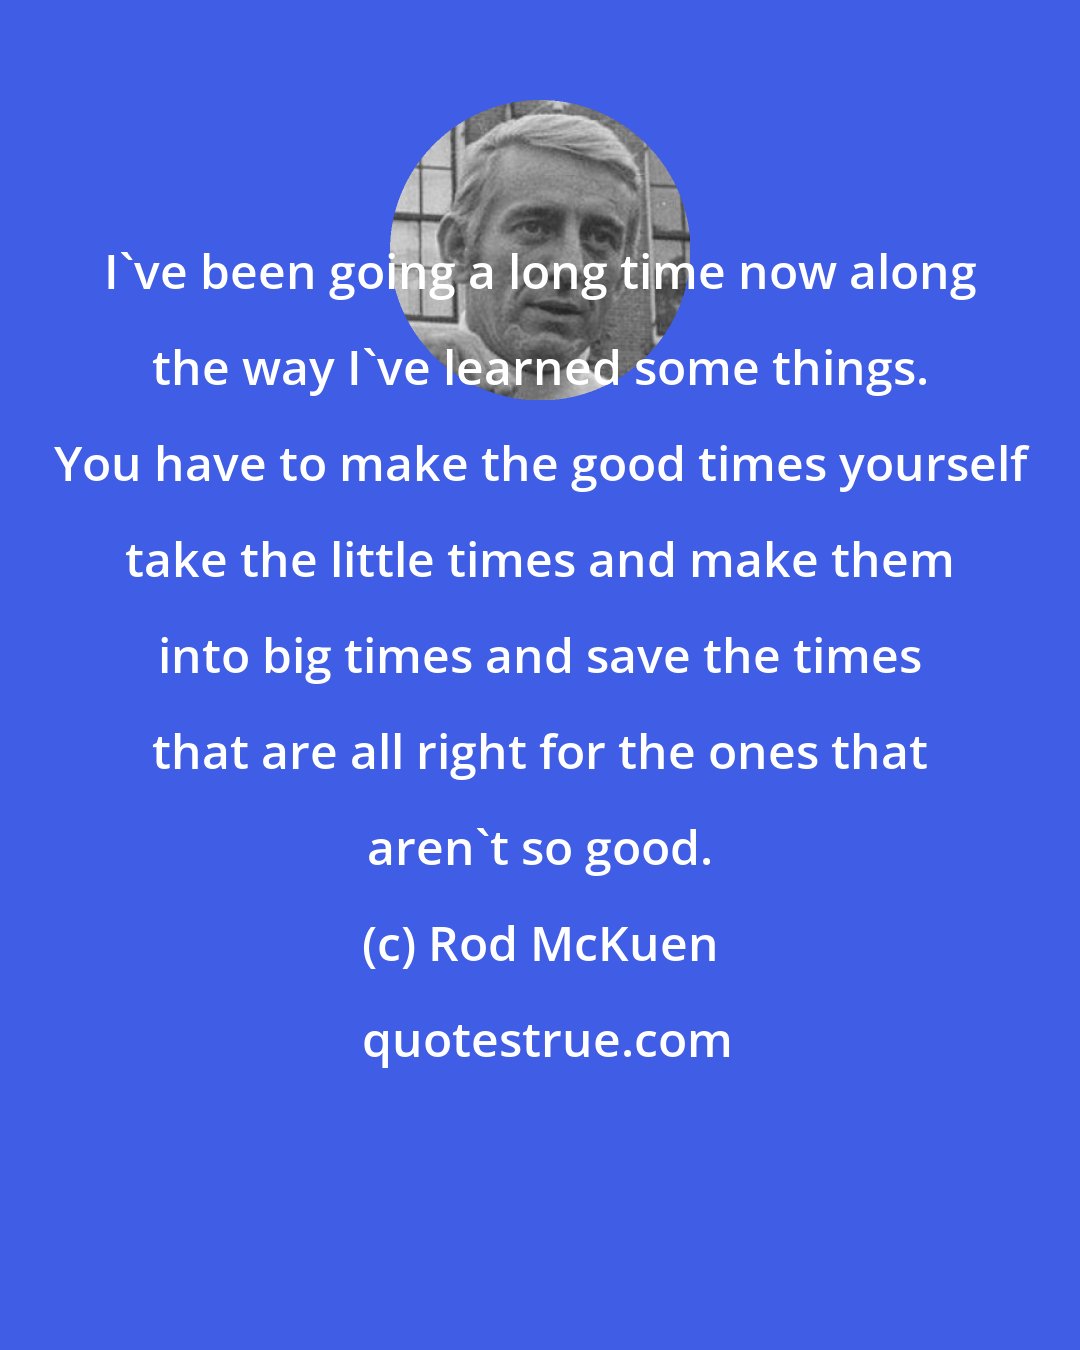 Rod McKuen: I've been going a long time now along the way I've learned some things. You have to make the good times yourself take the little times and make them into big times and save the times that are all right for the ones that aren't so good.